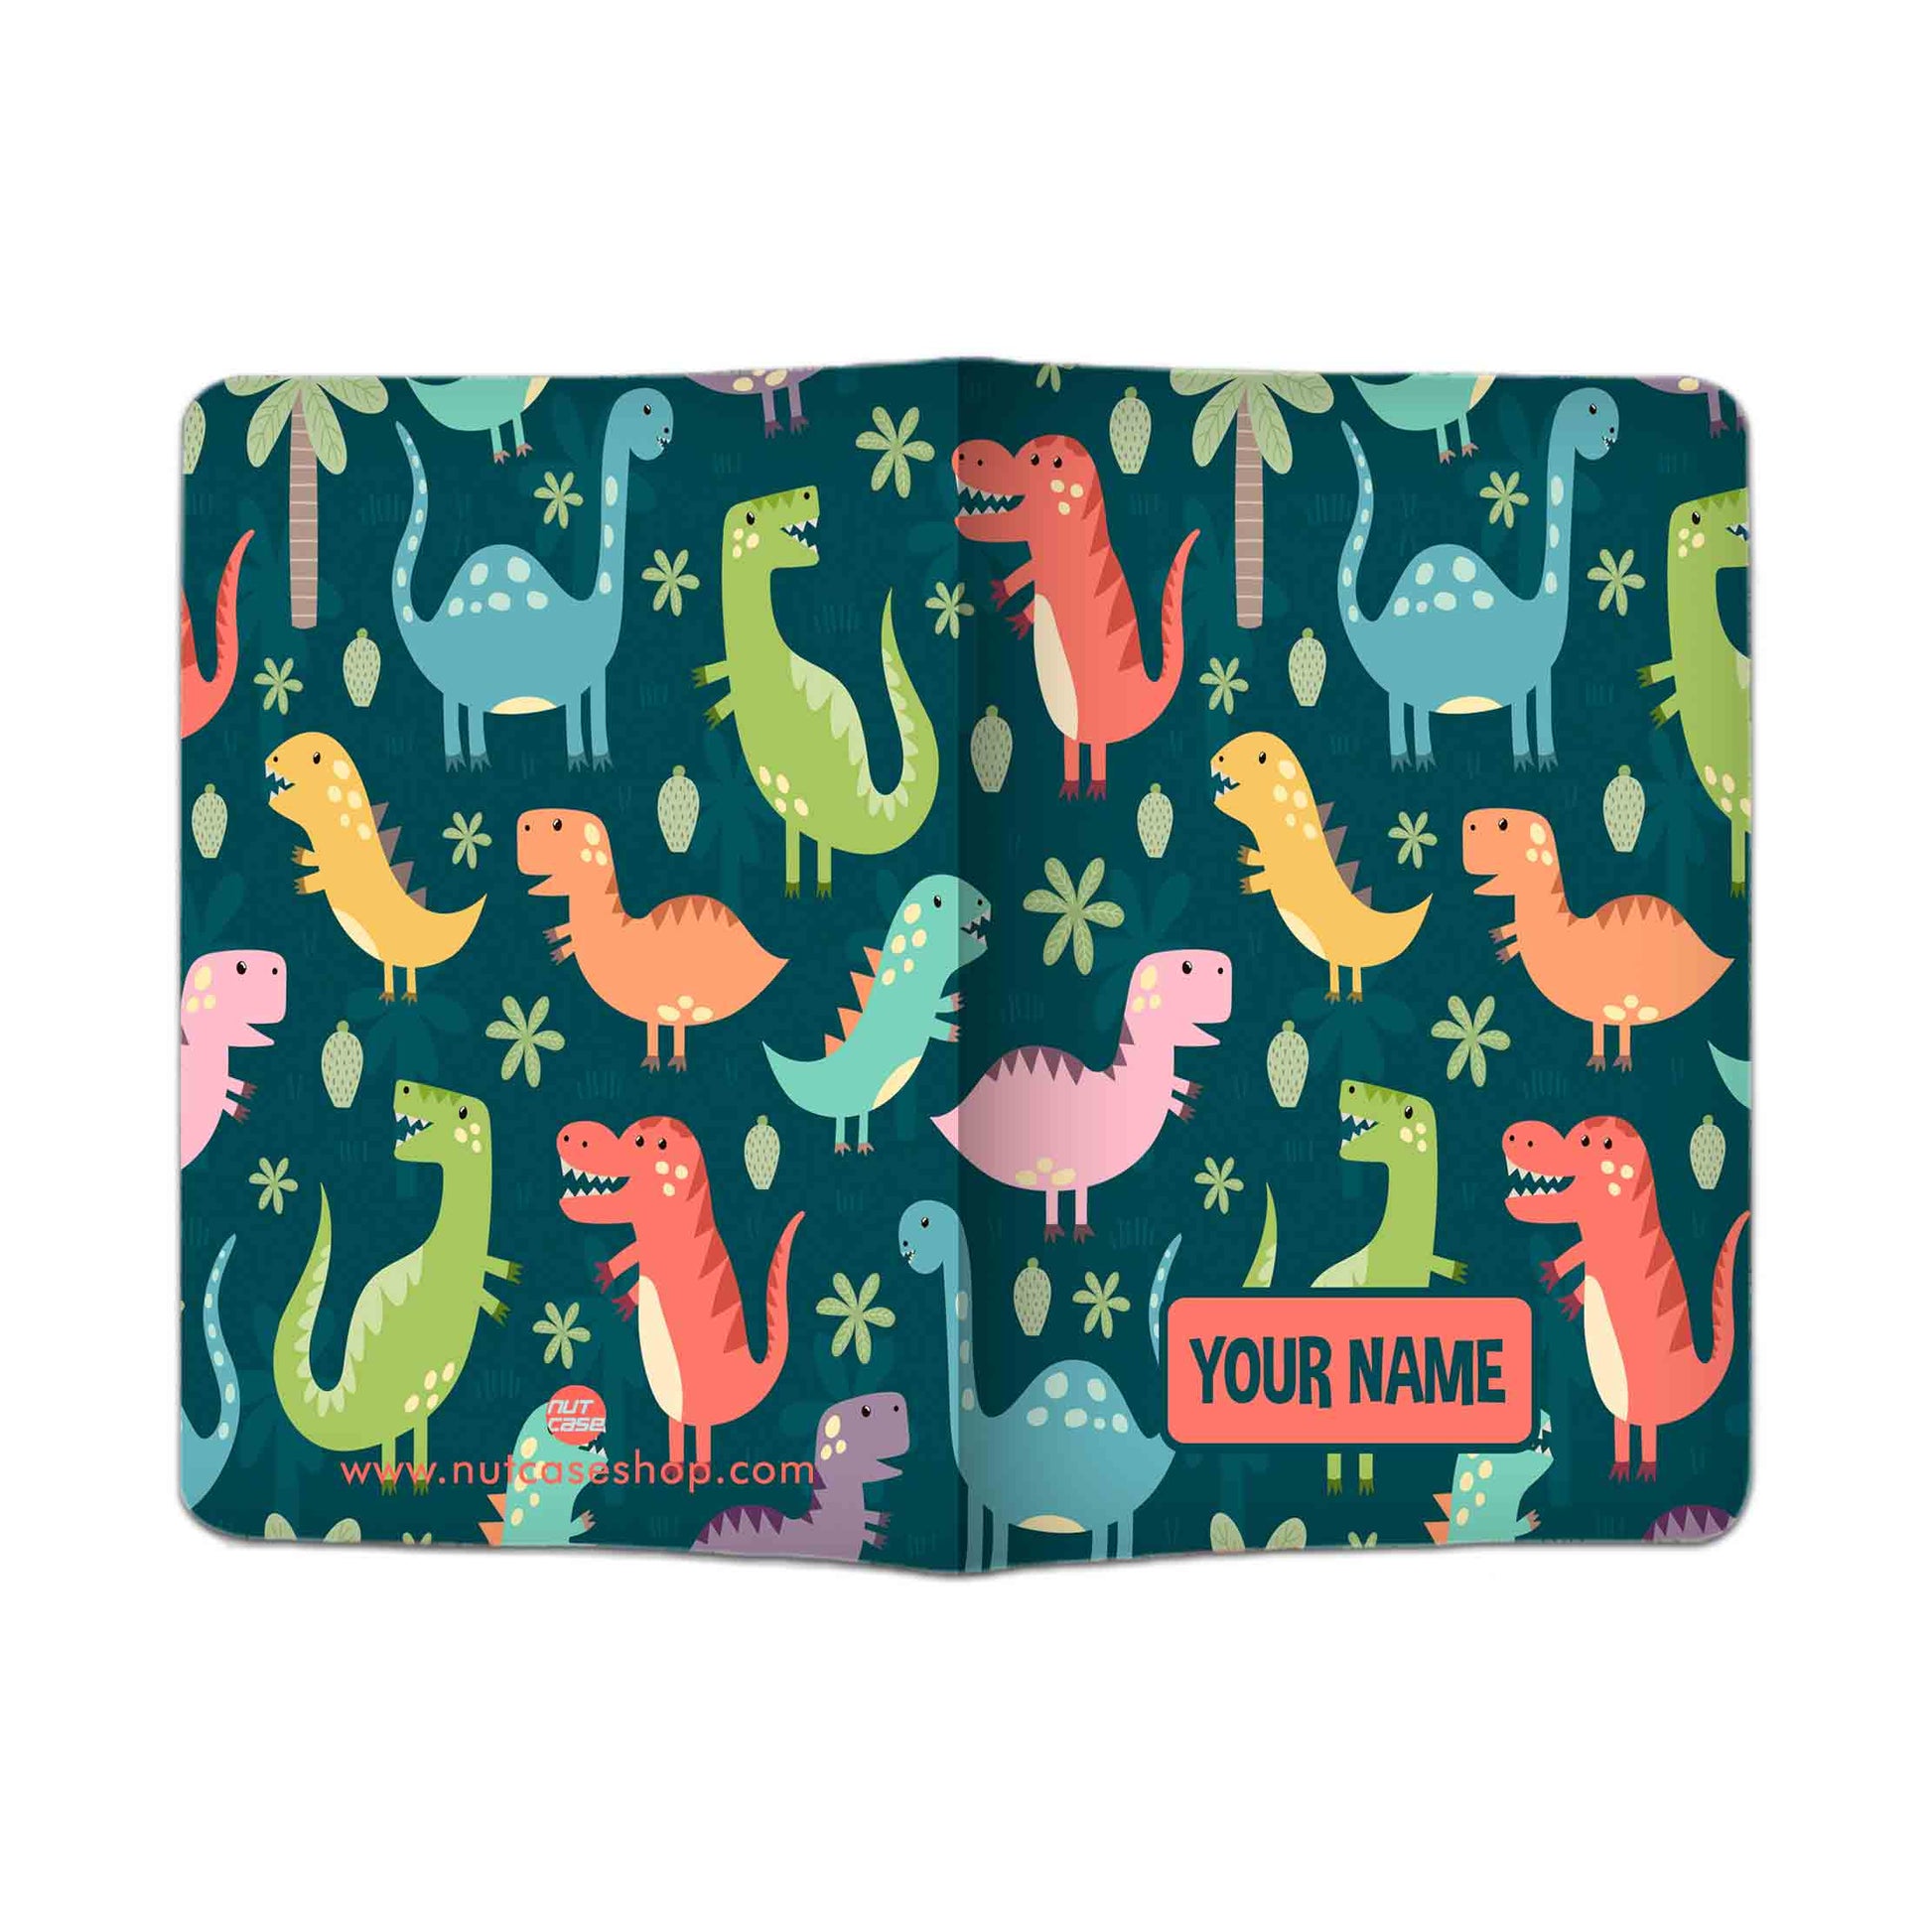 Customized Passport Cover Baggage Tag Set for Children - Sweet Dinosaurs Nutcase